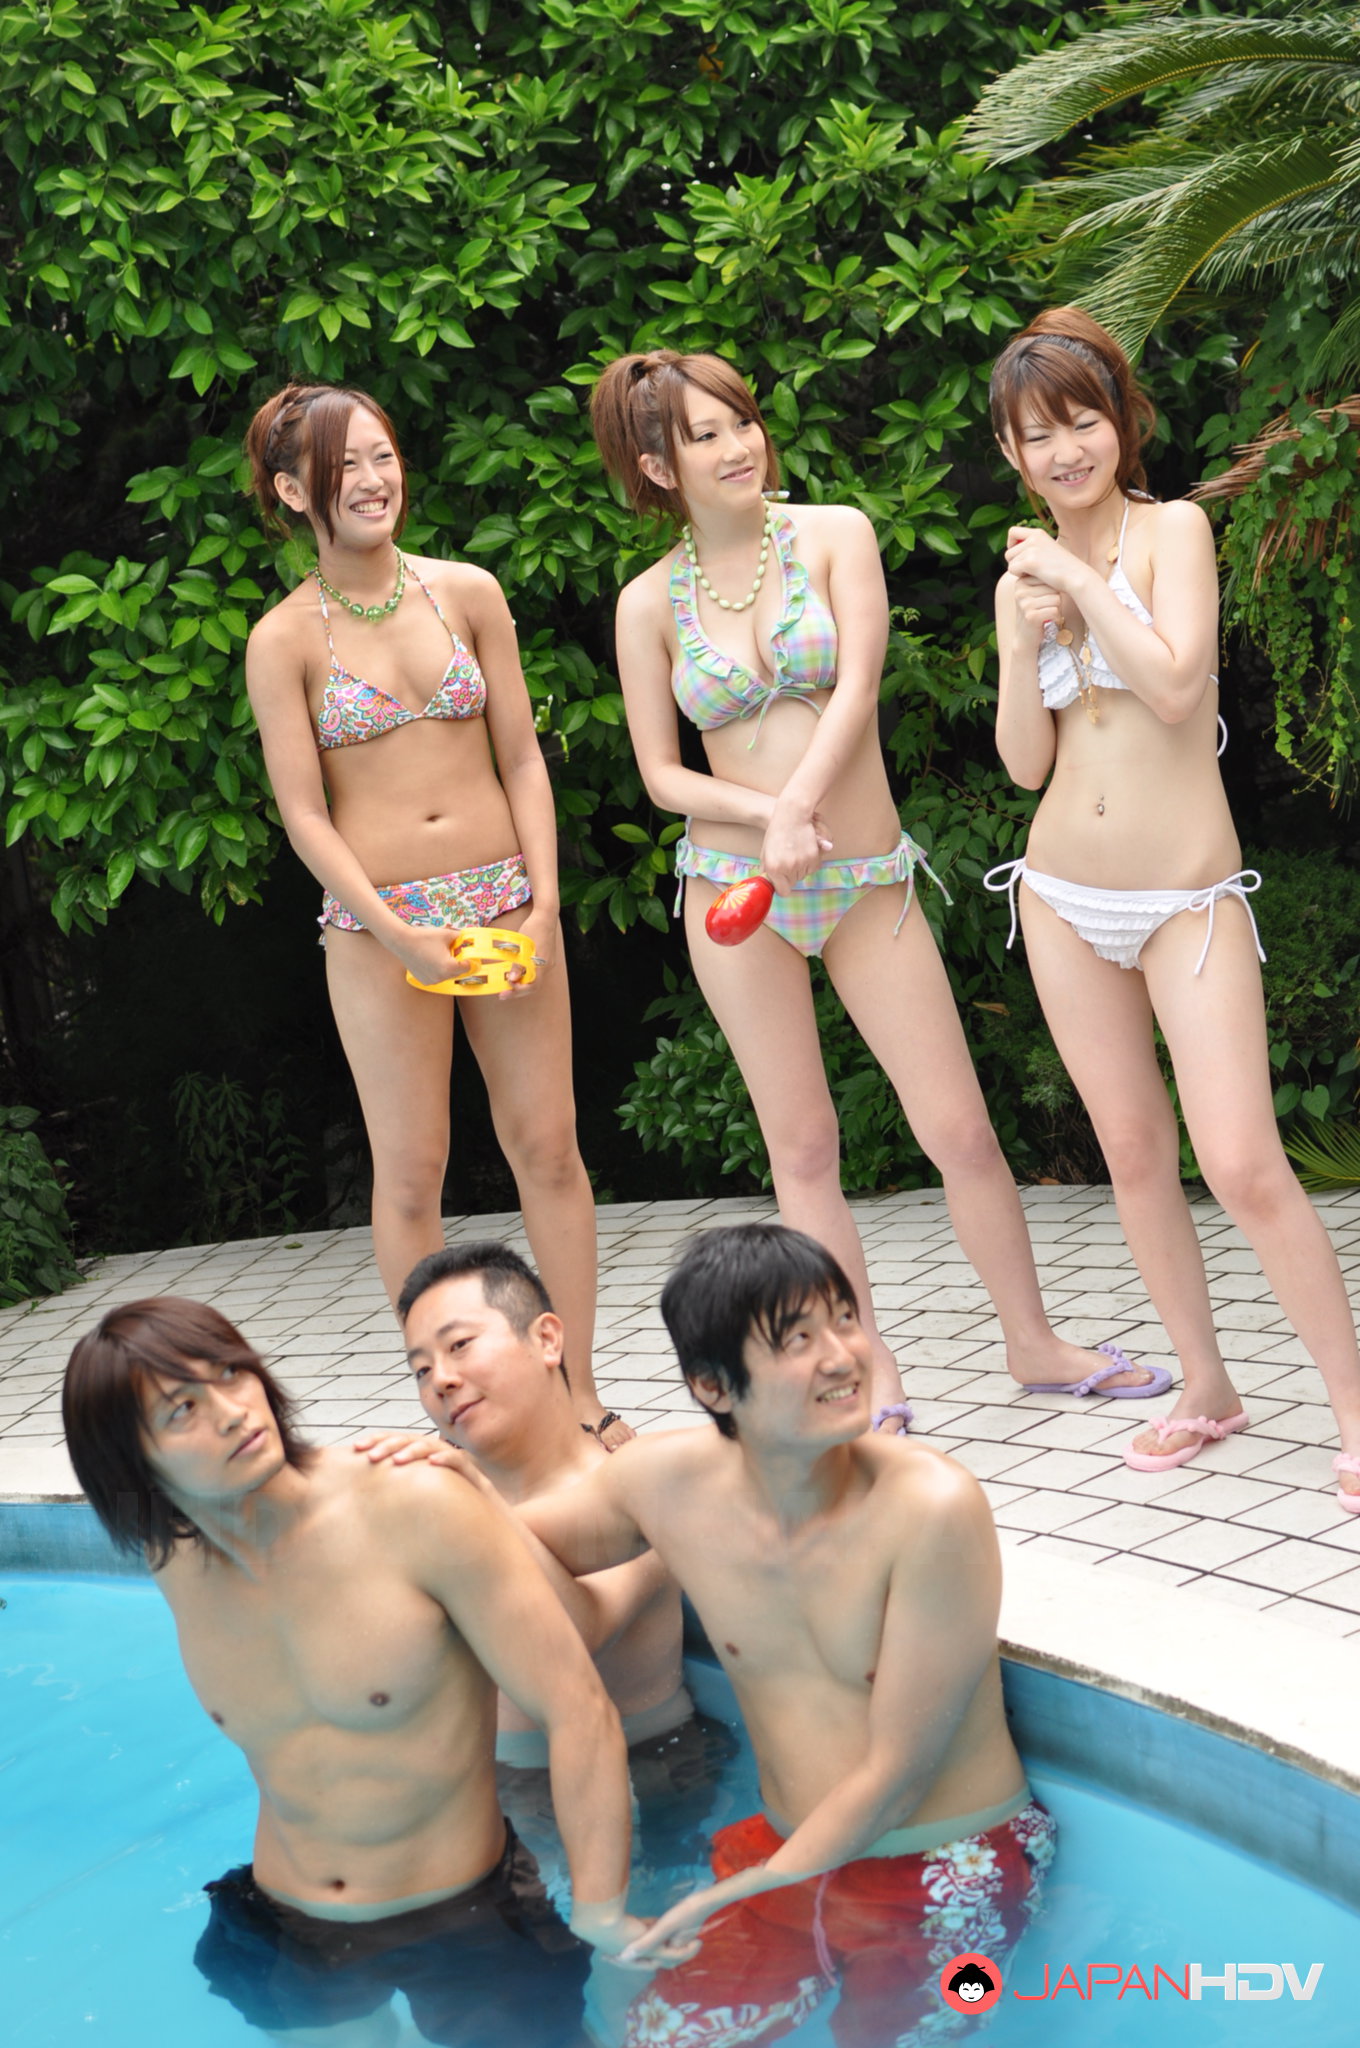 Japanese Party Girl - Japanese girls enjoy in some sexy pool party